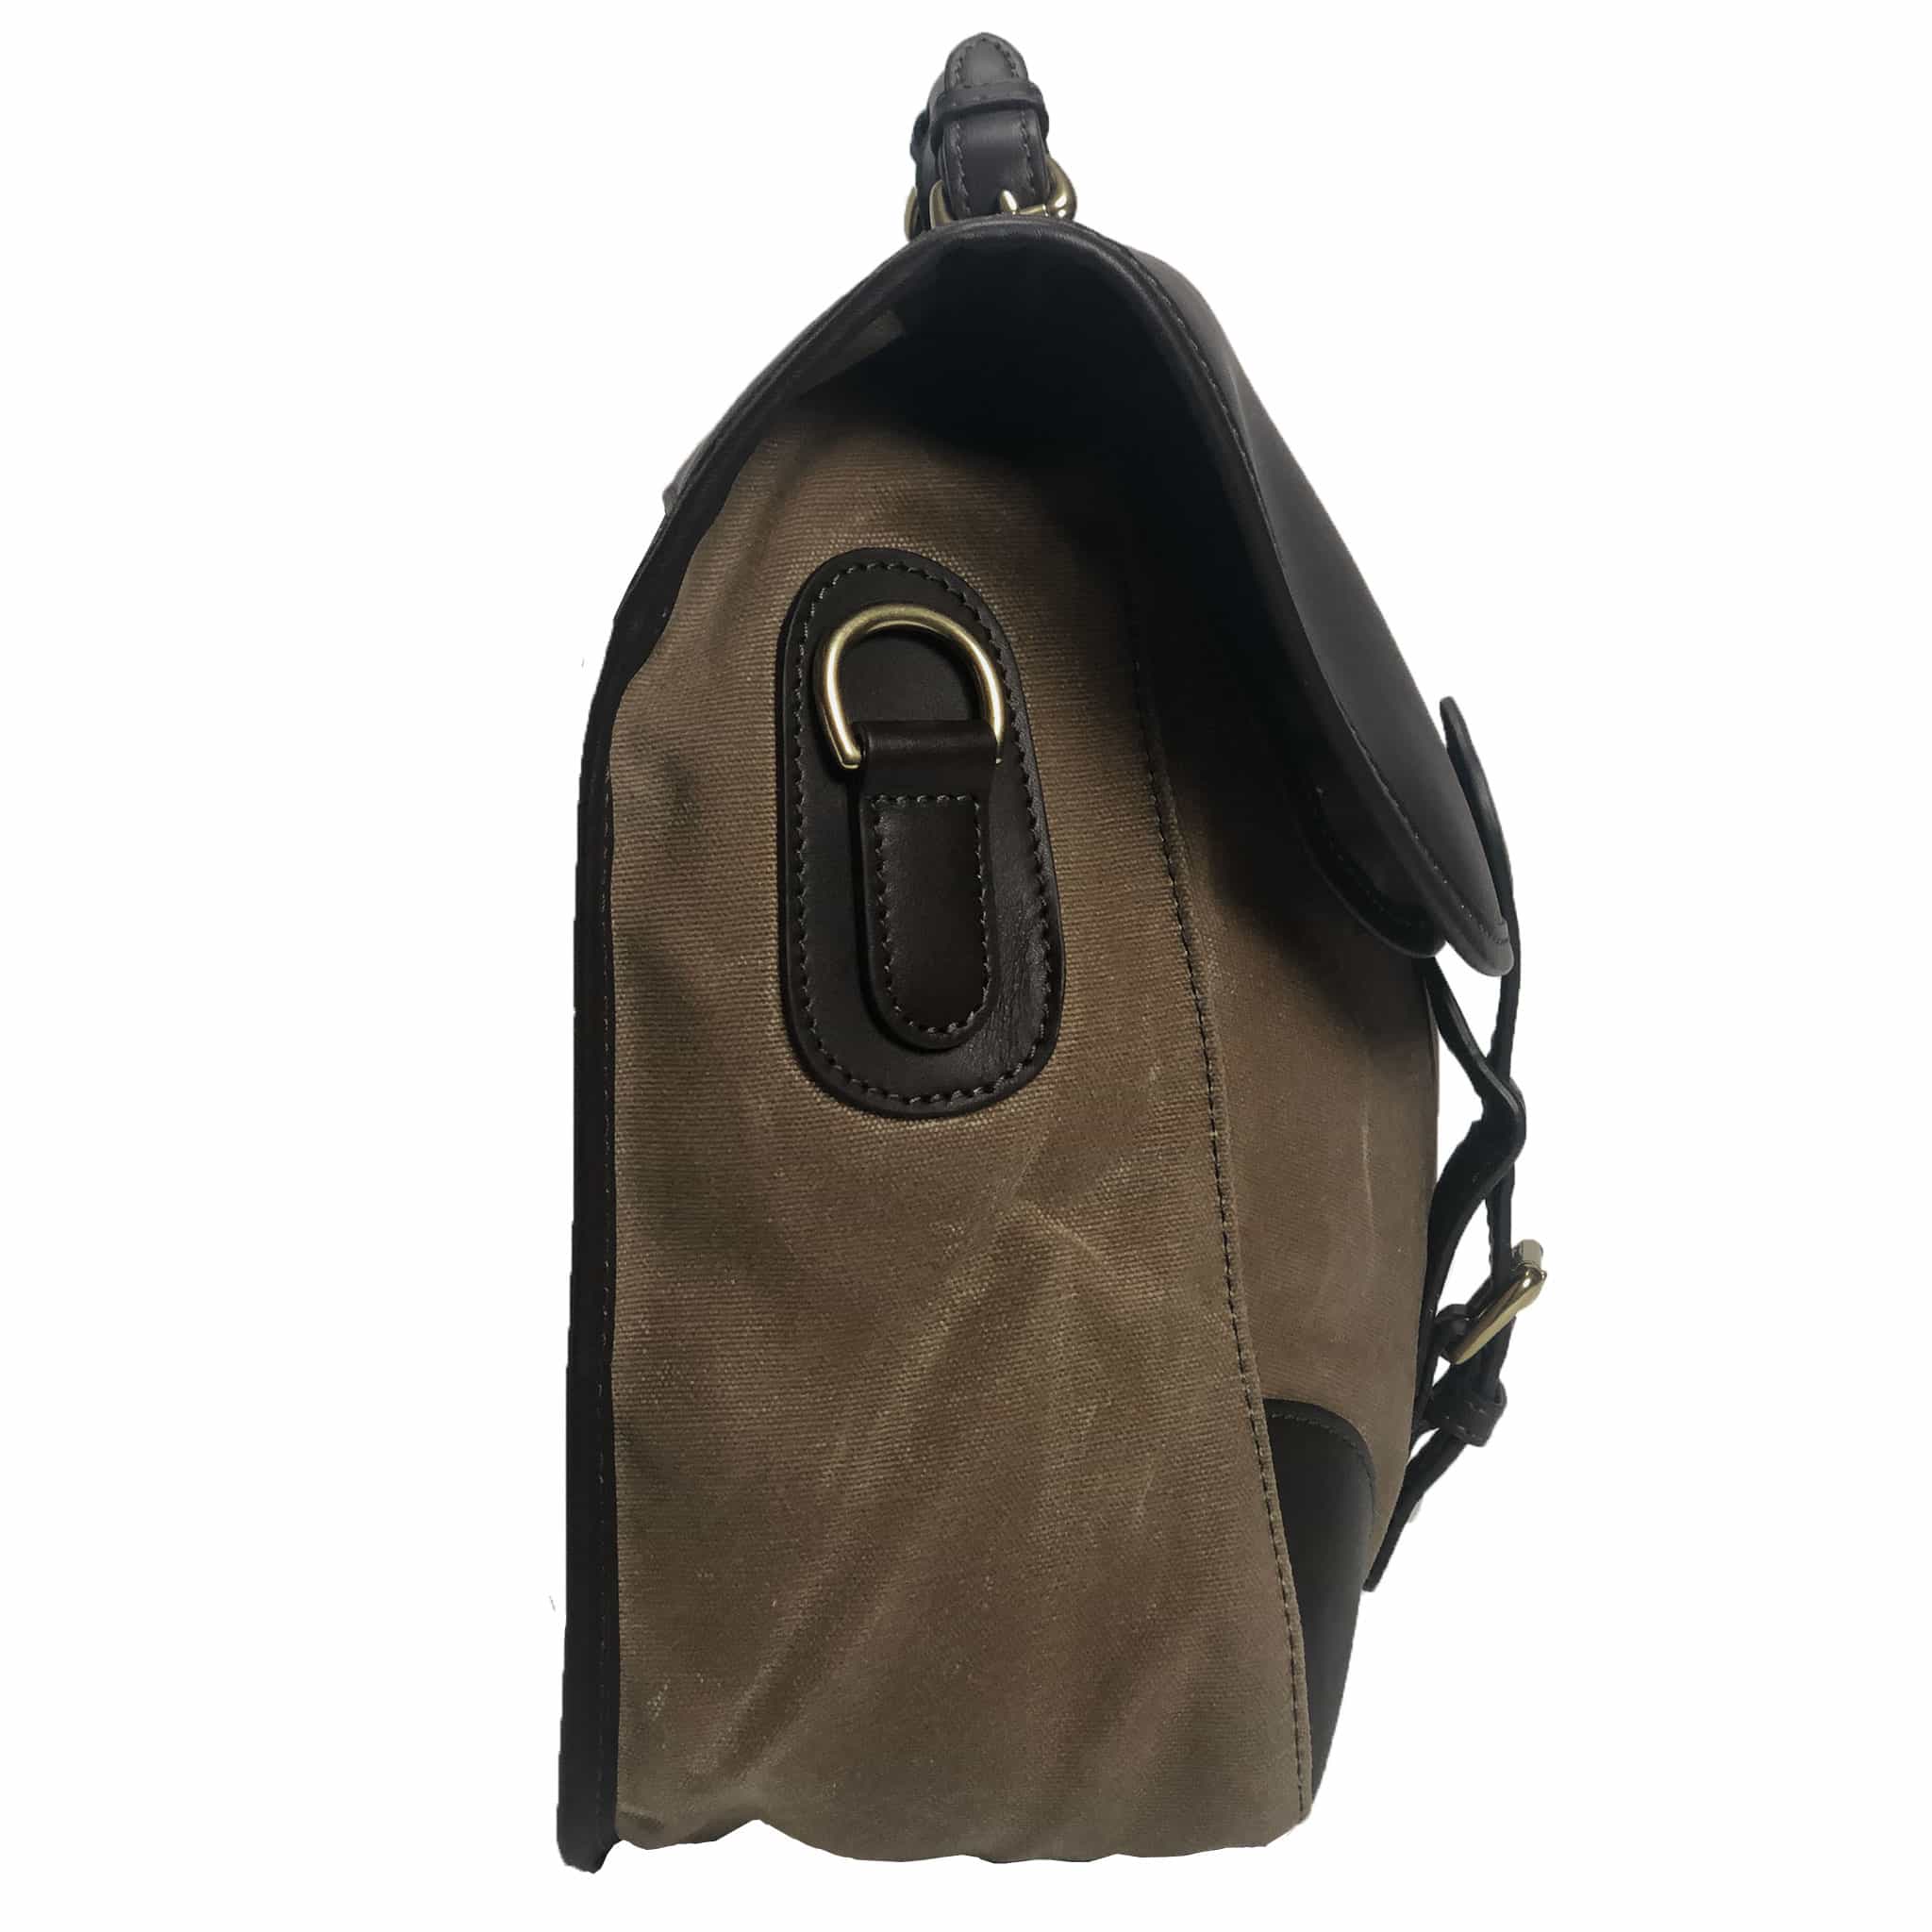 End view of Anglers Bag classic cross body messenger tan wax cotton with dark brown stout leather